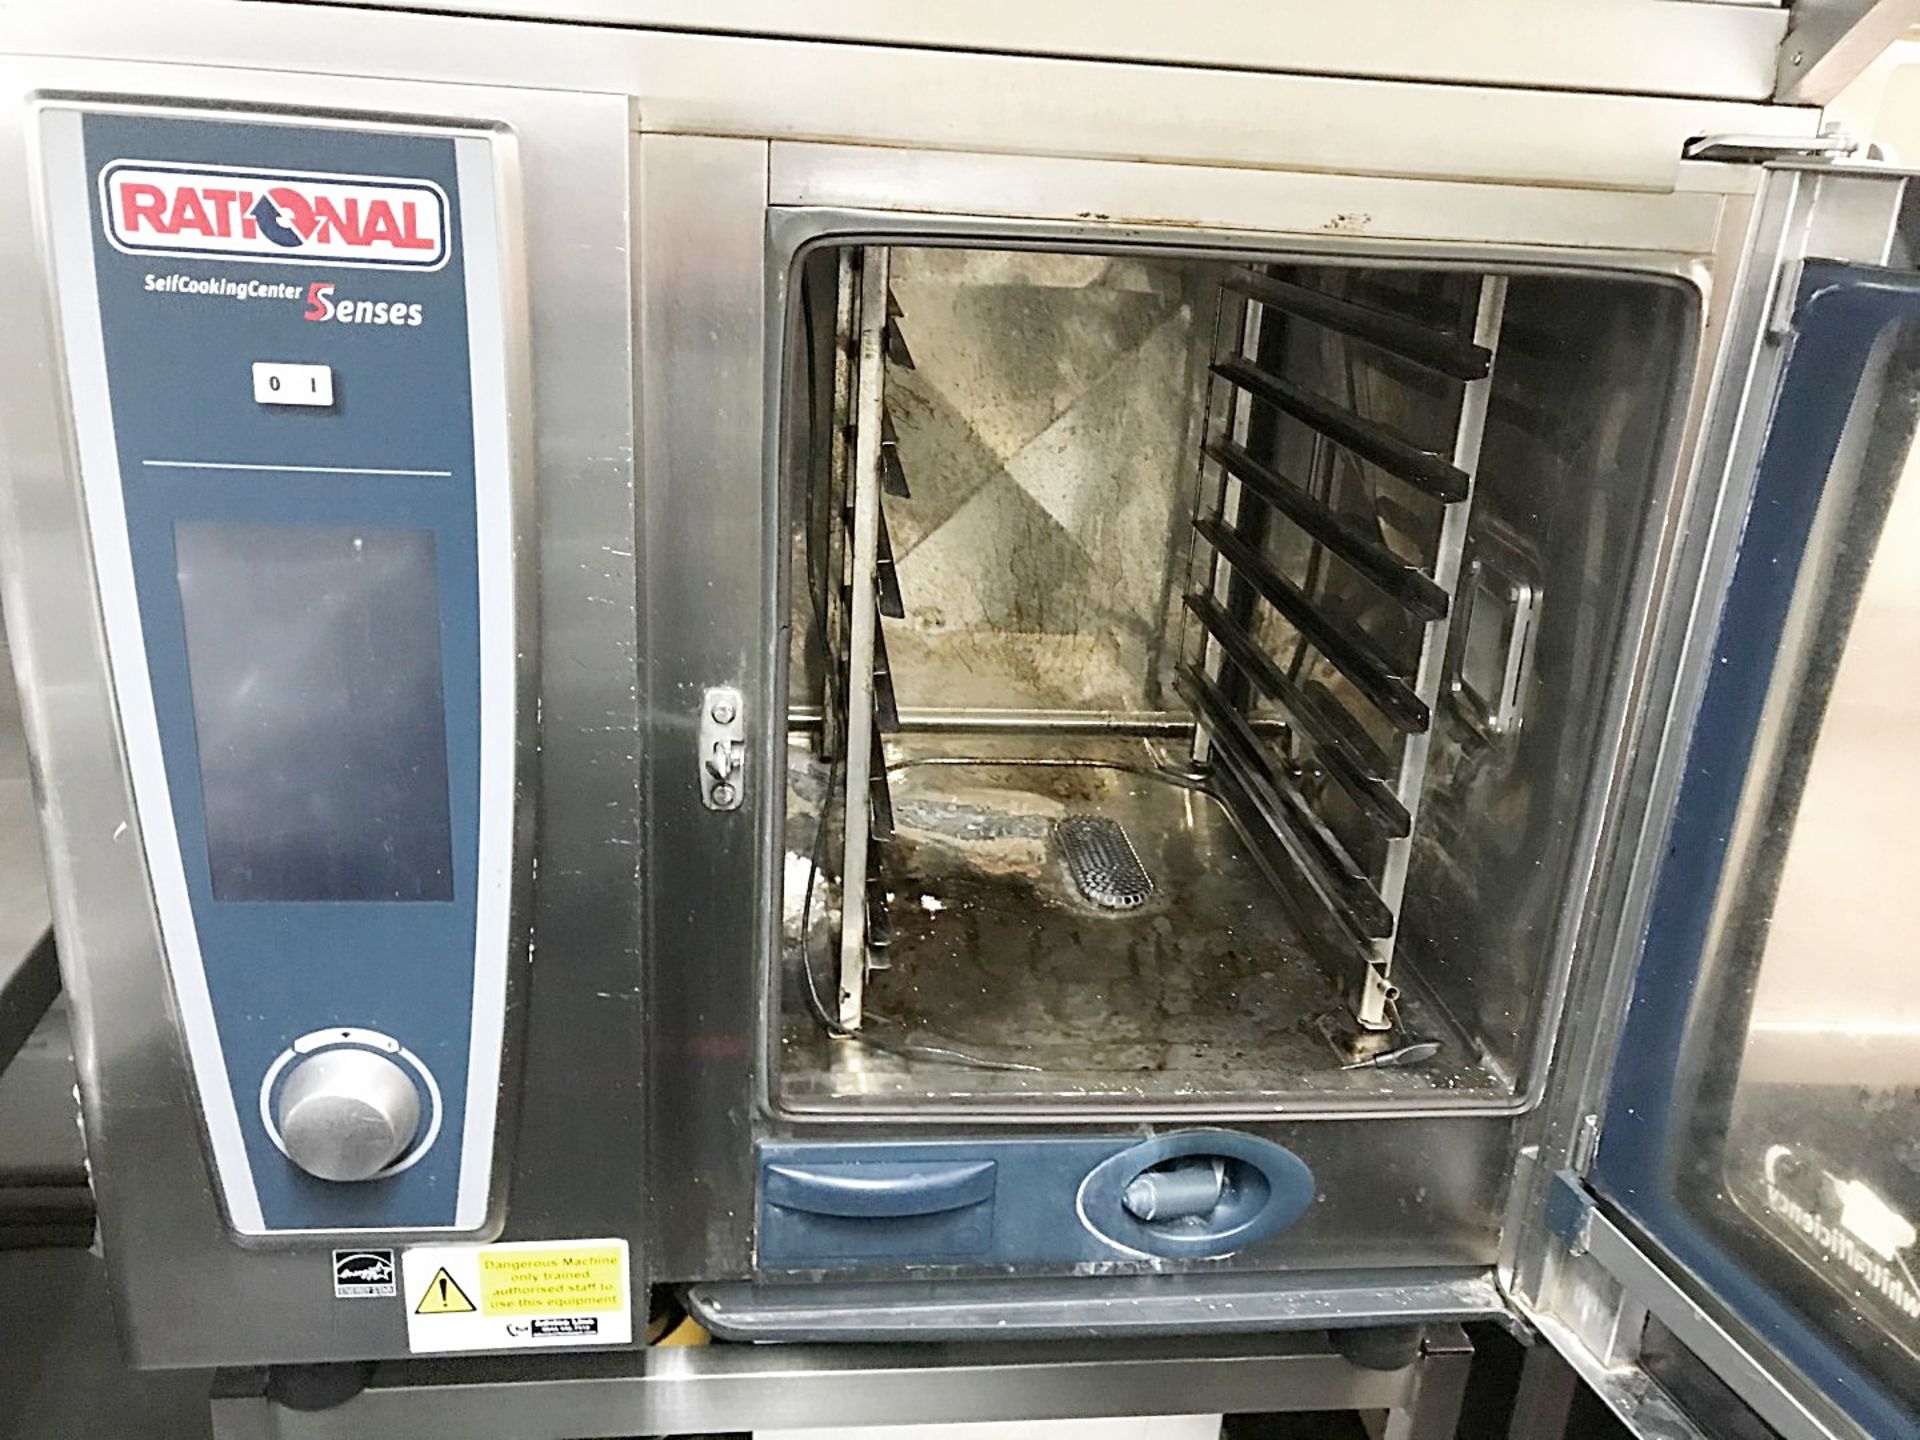 1 x Rational SCC WE 61 Combi Oven - Includes Stand and Hood - 3 Phase - CL554 - Ref IM289 - Loc - Image 5 of 10